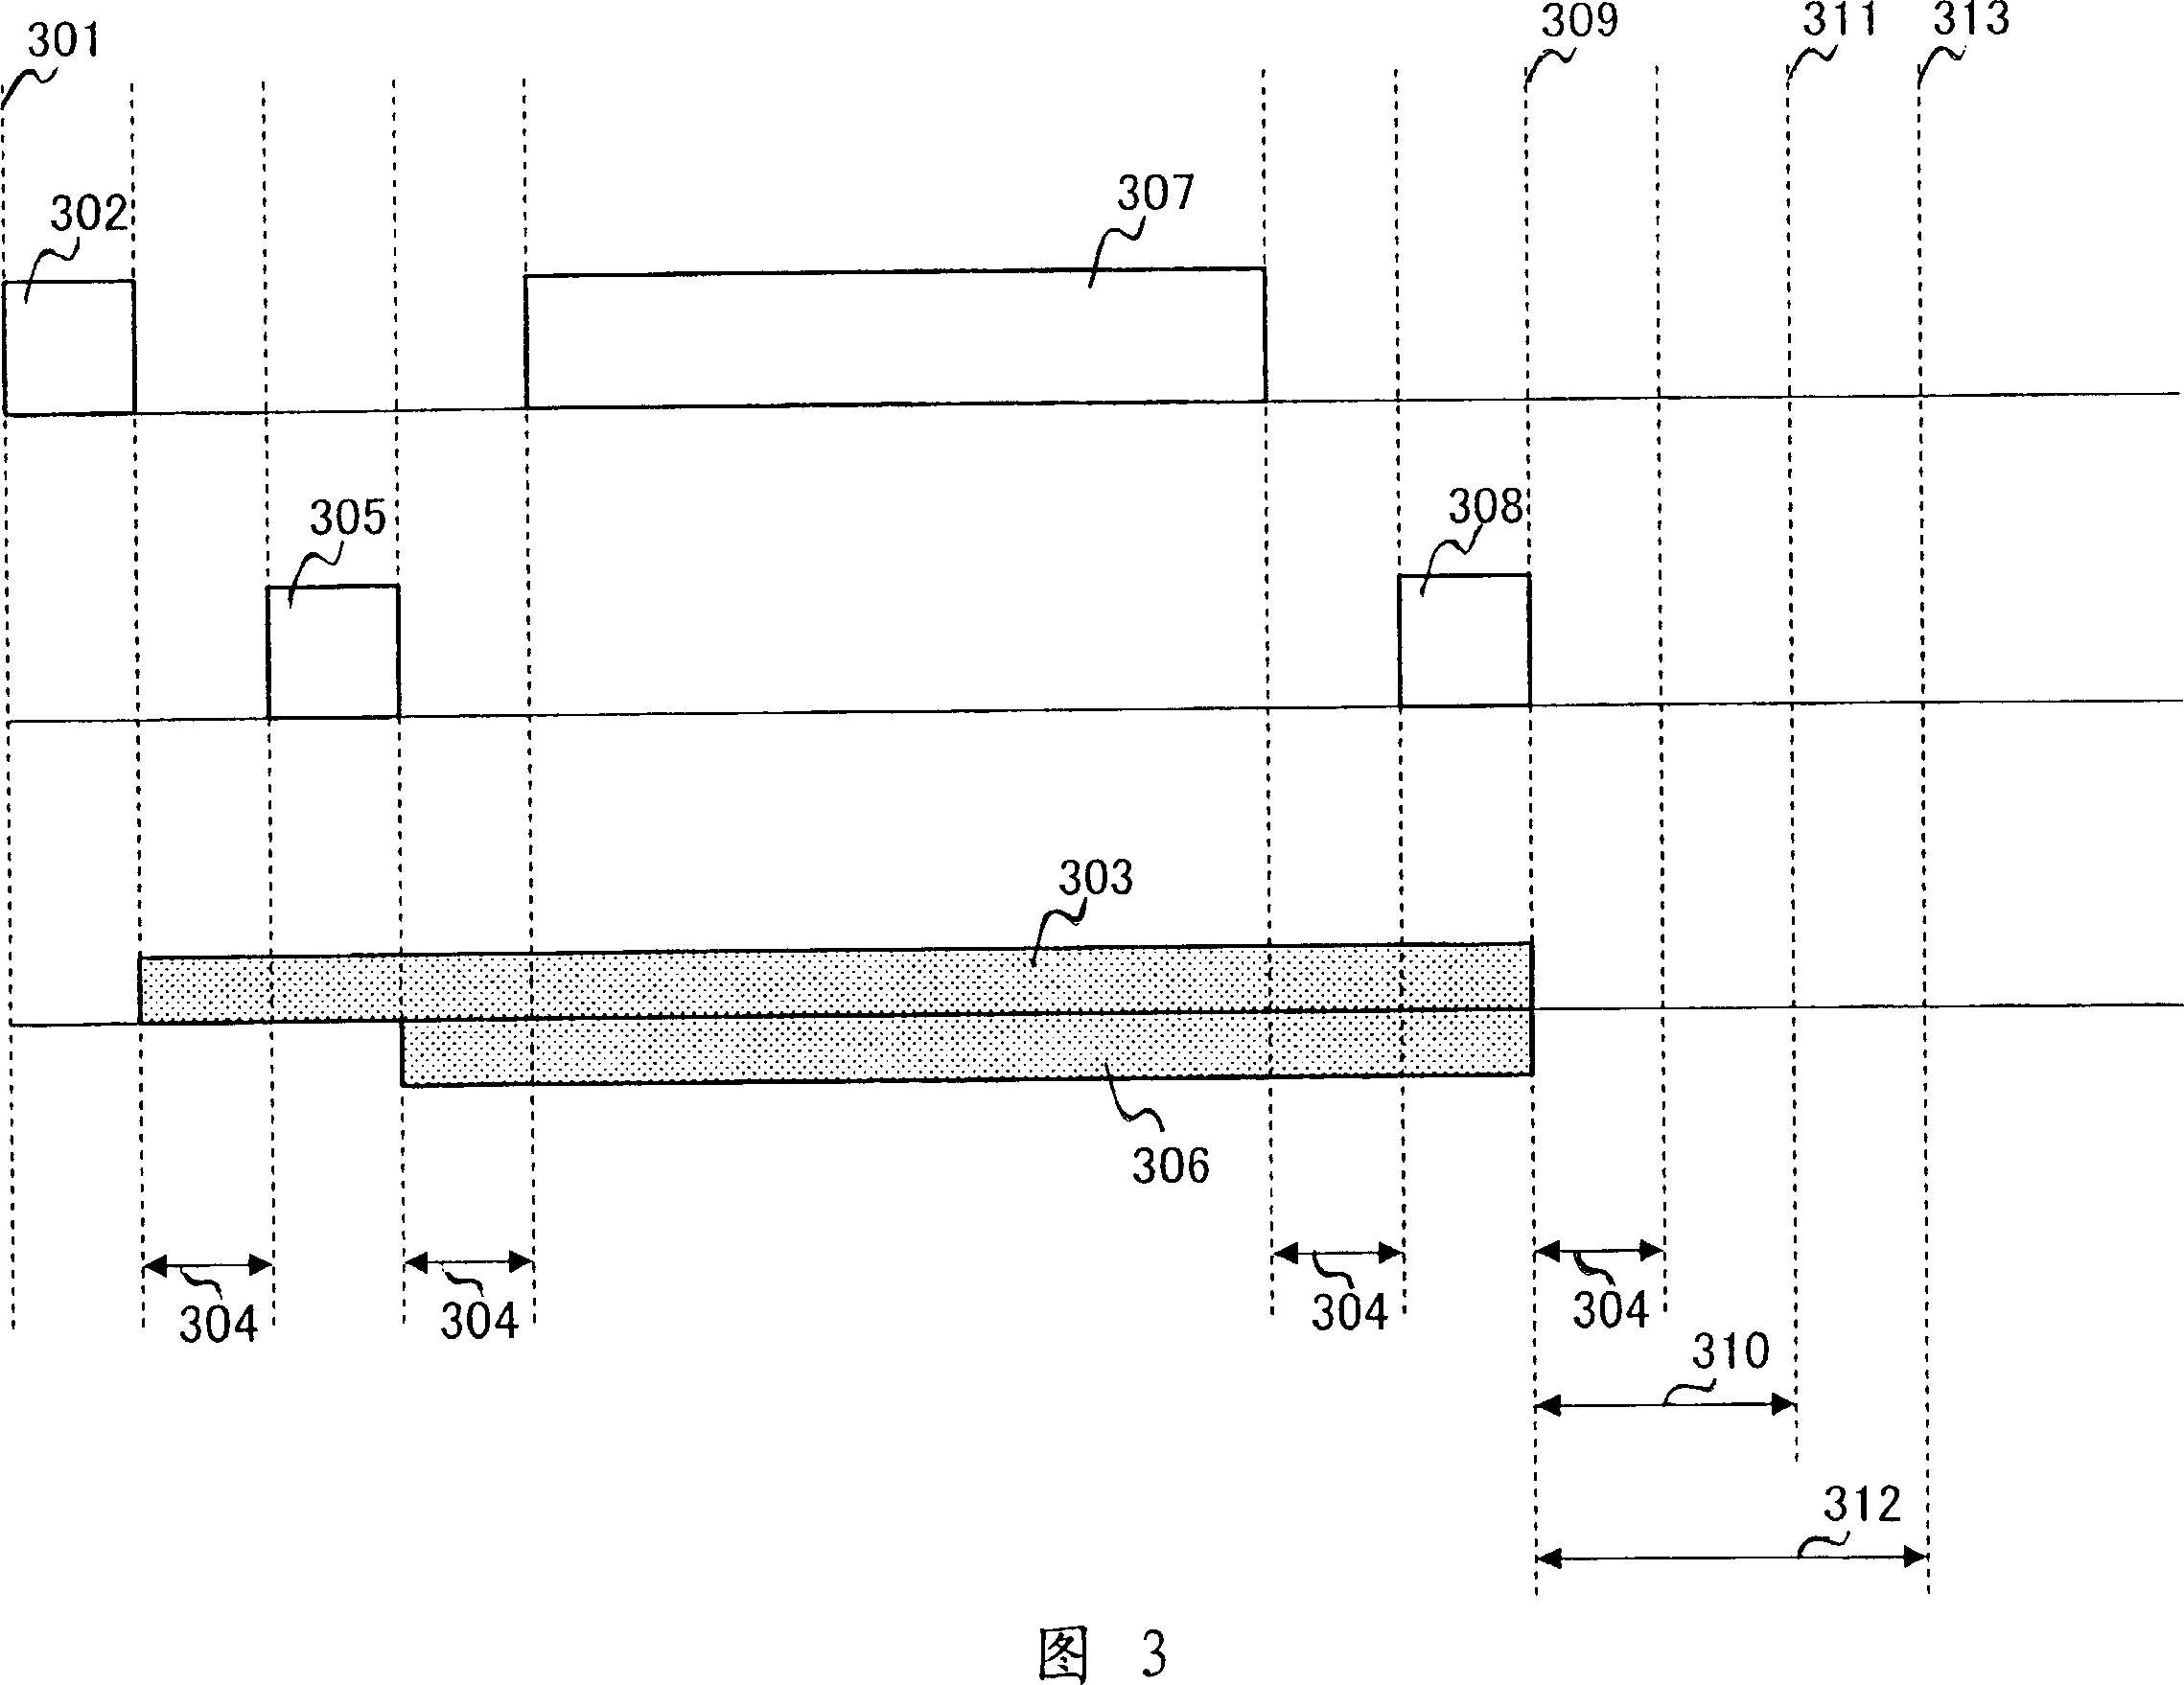 Method for reducing medium access overhead in a wireless network